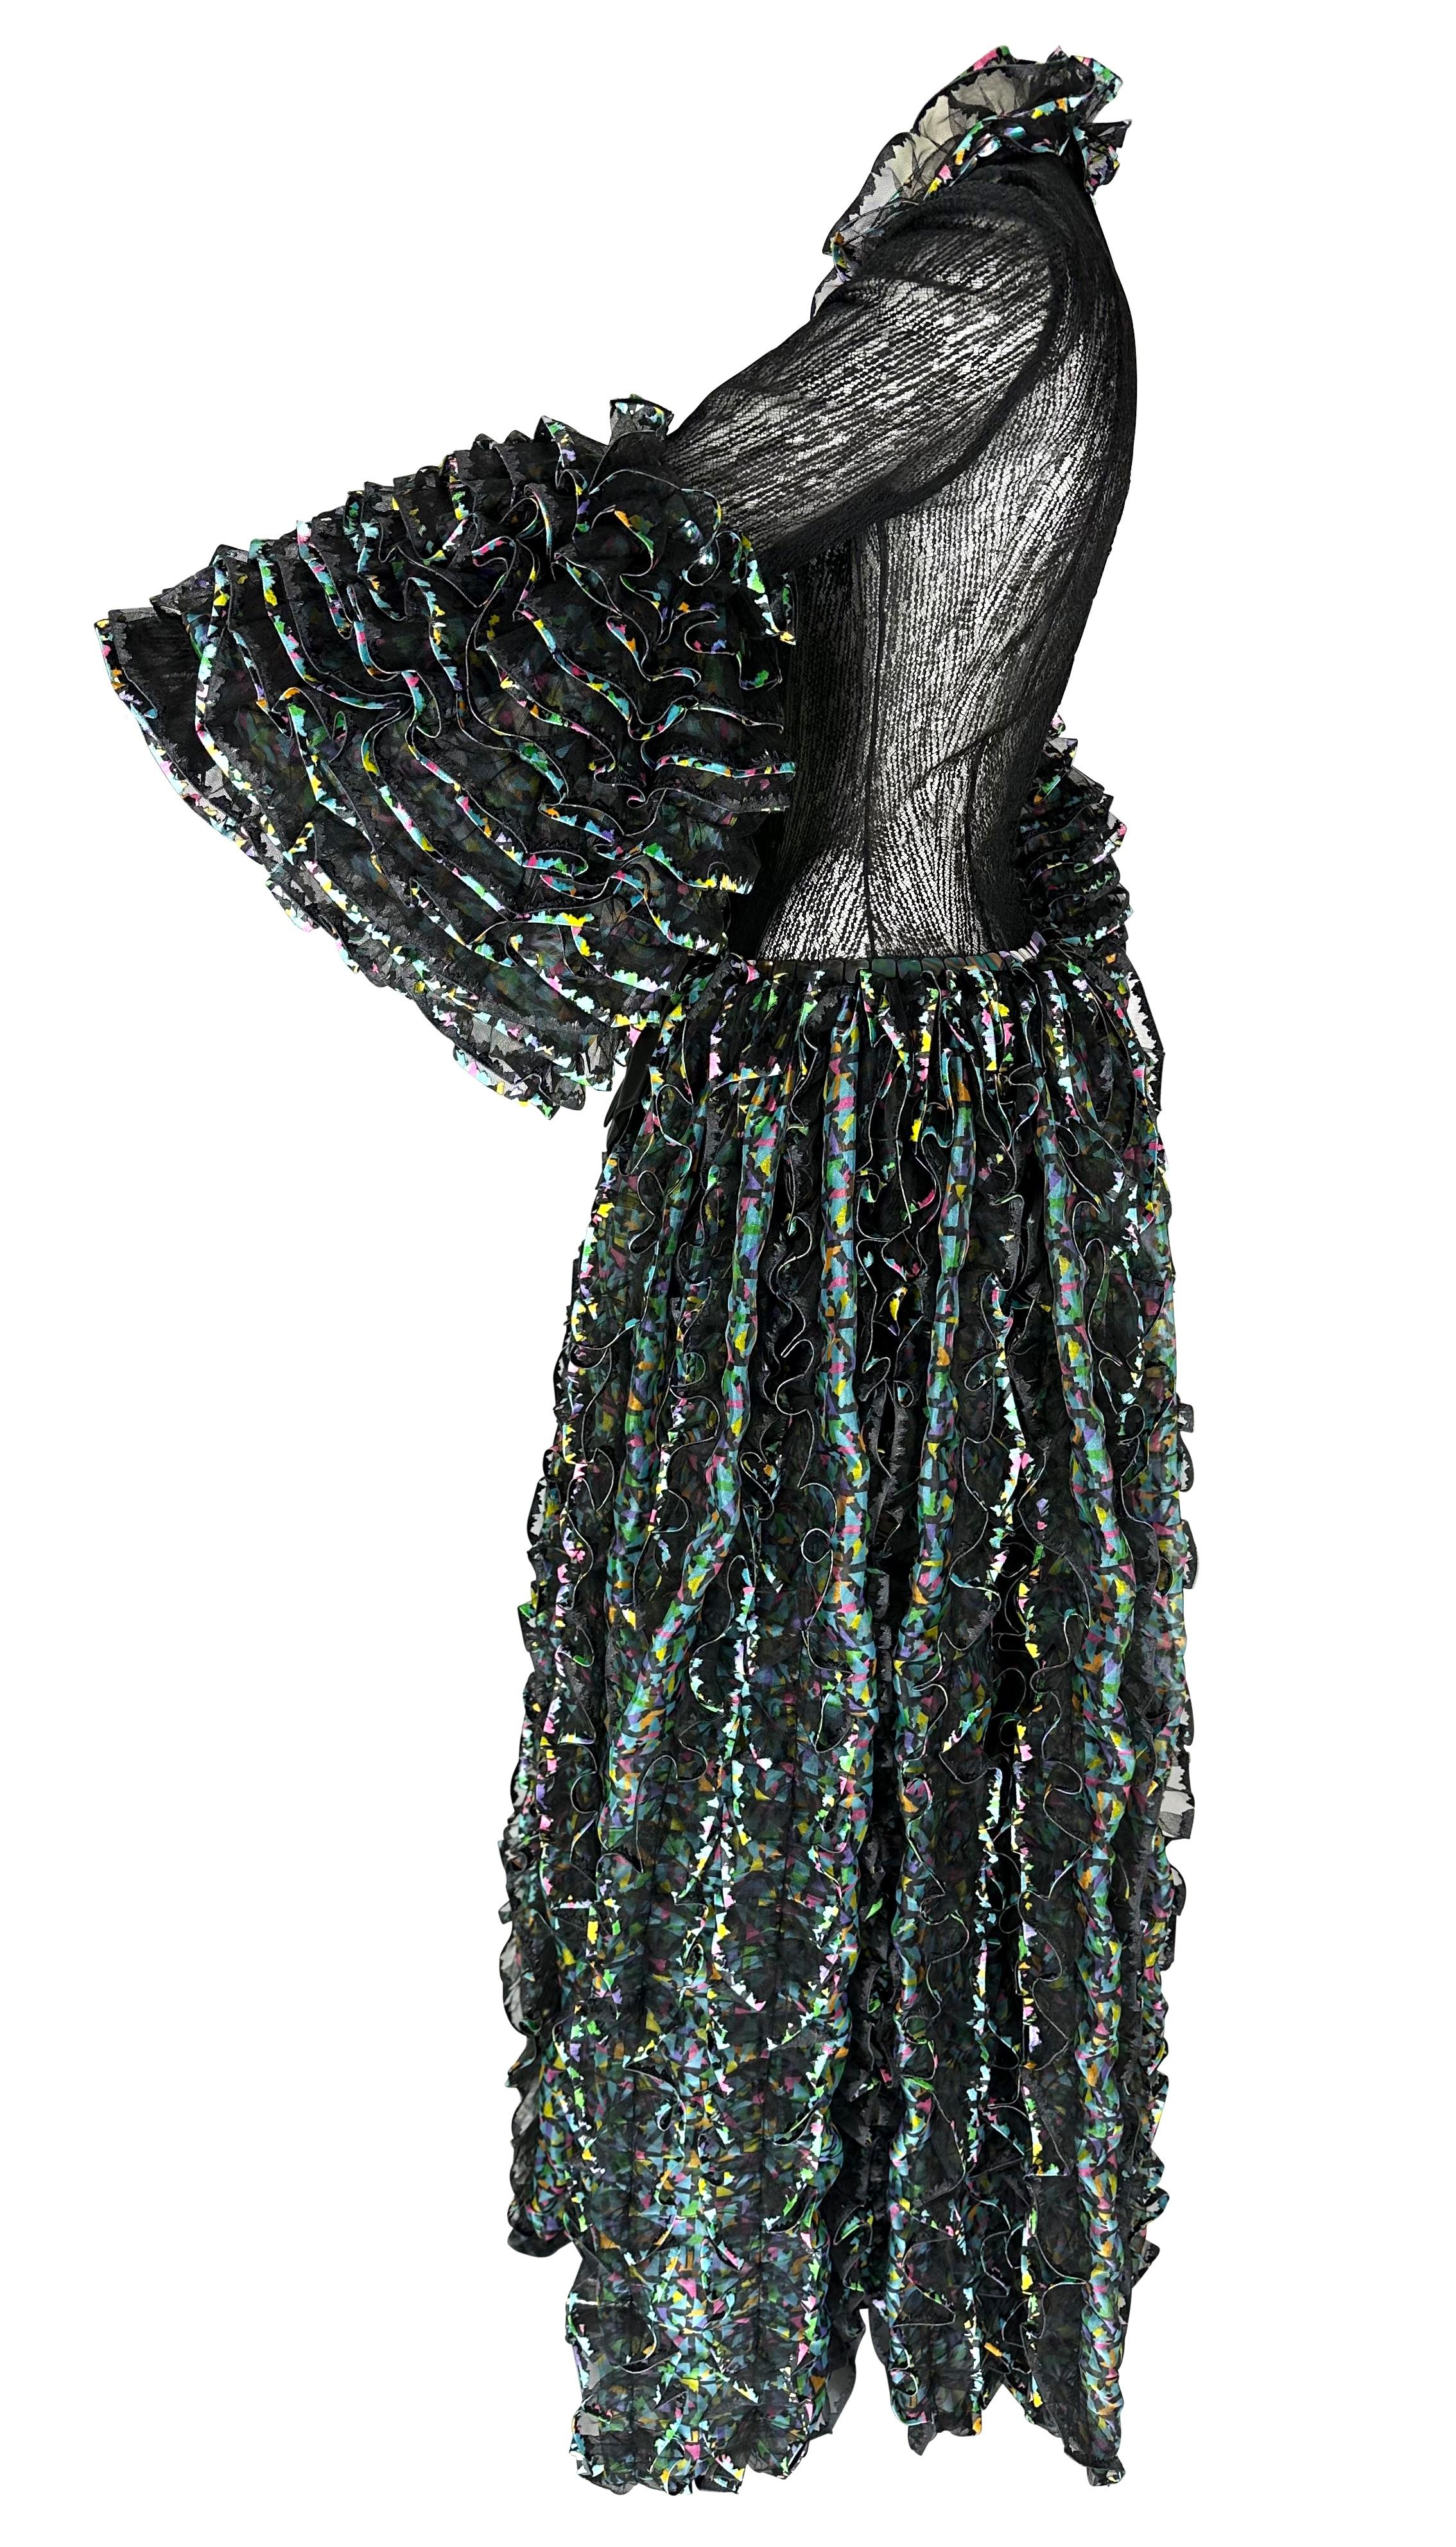 S/S 1987 Paco Rabanne Haute Couture Runway Sheer Embroidered Ruffle Gown In Excellent Condition For Sale In Philadelphia, PA